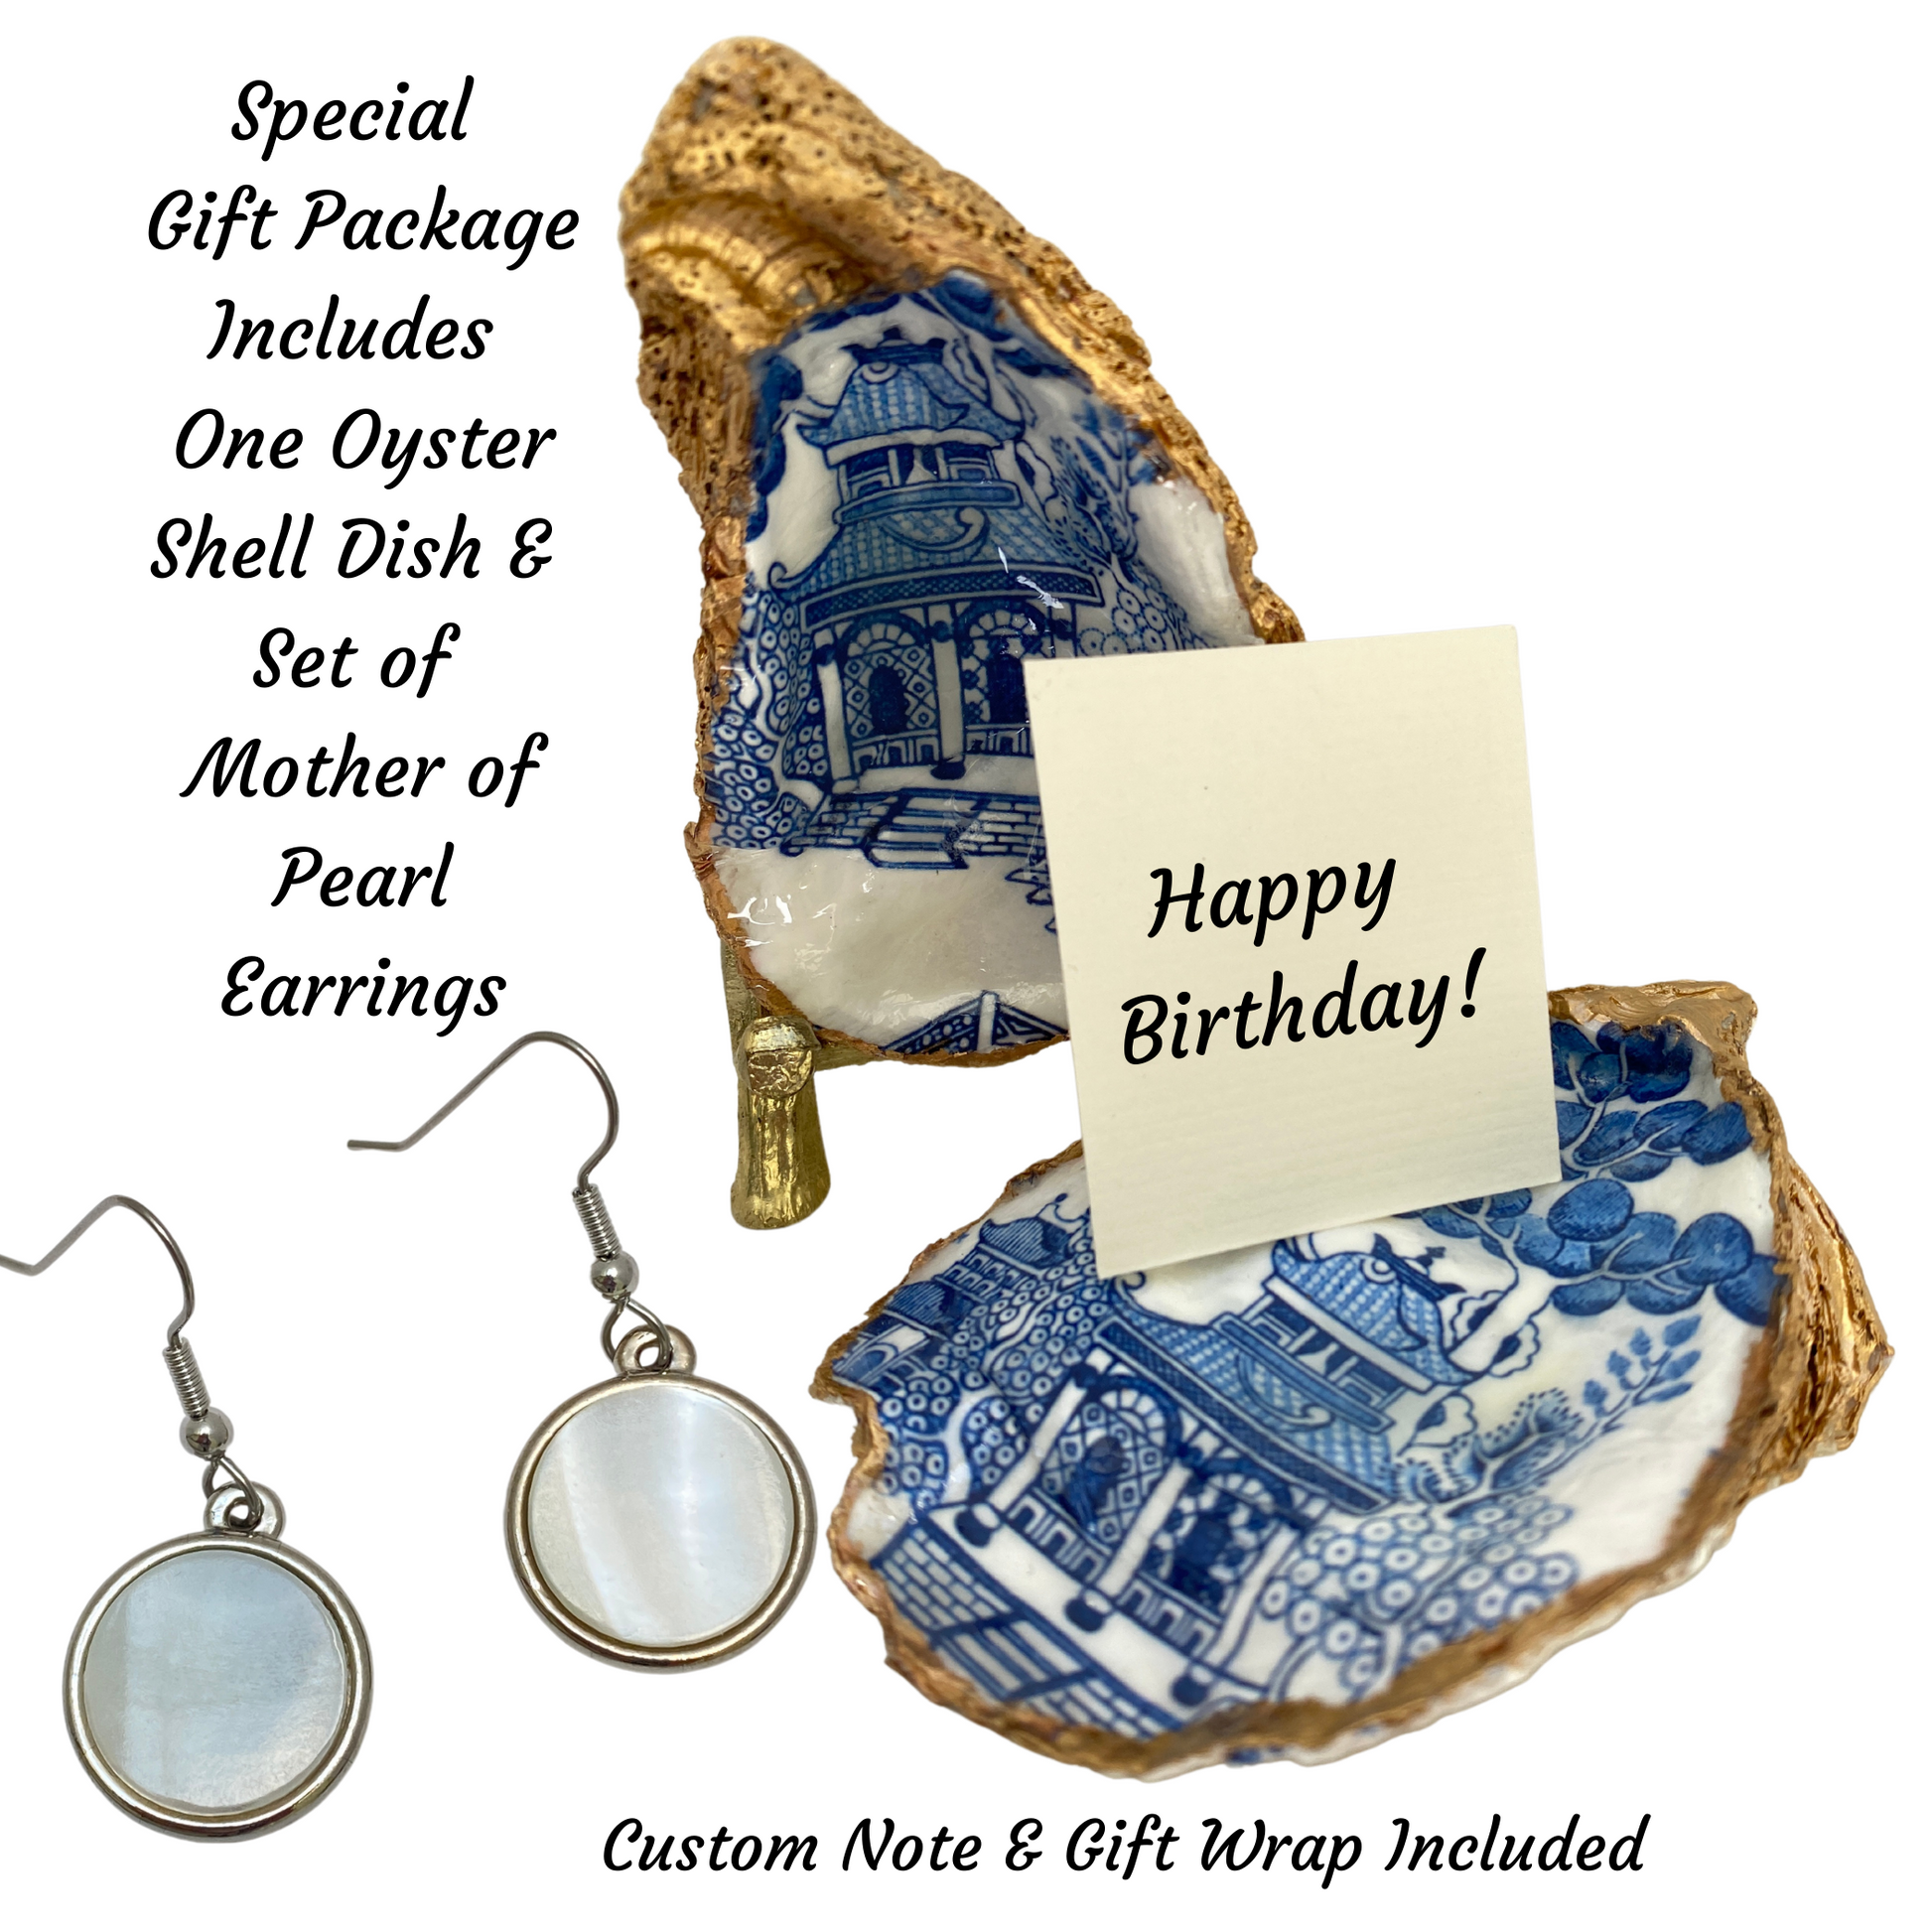 This special package of the Mother of Pearl earrings and the blue and white Chinoiserie oyster shell dish is a great Birthday gift for Mom.